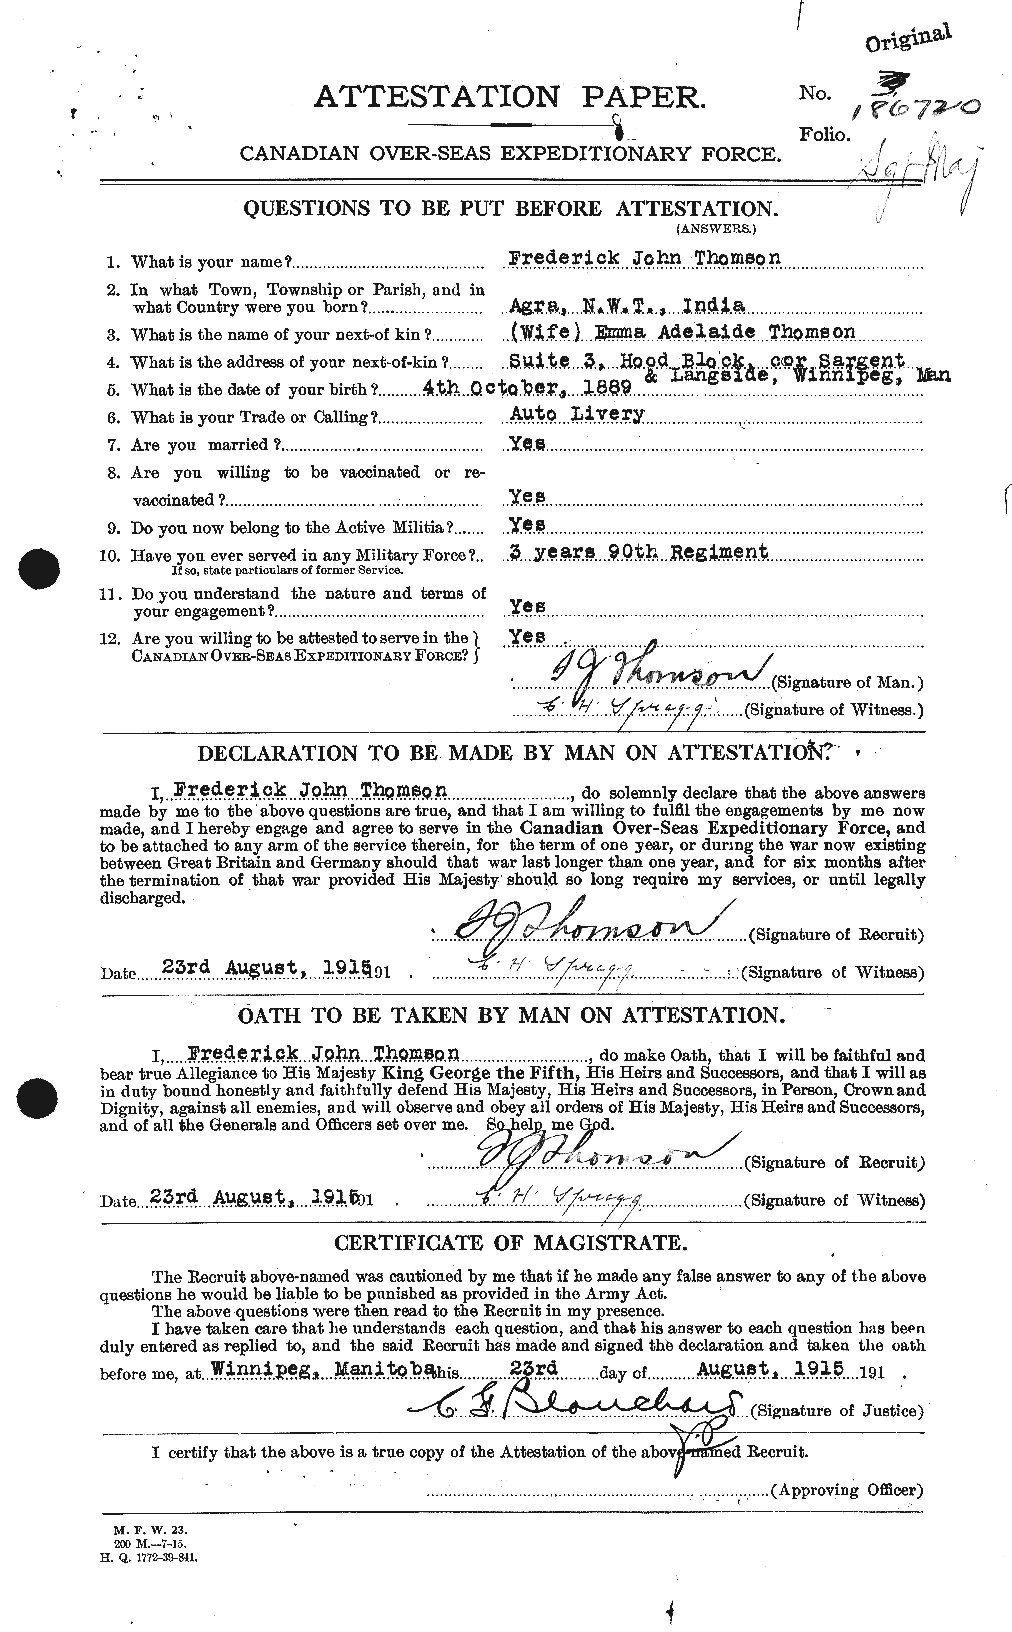 Personnel Records of the First World War - CEF 633681a